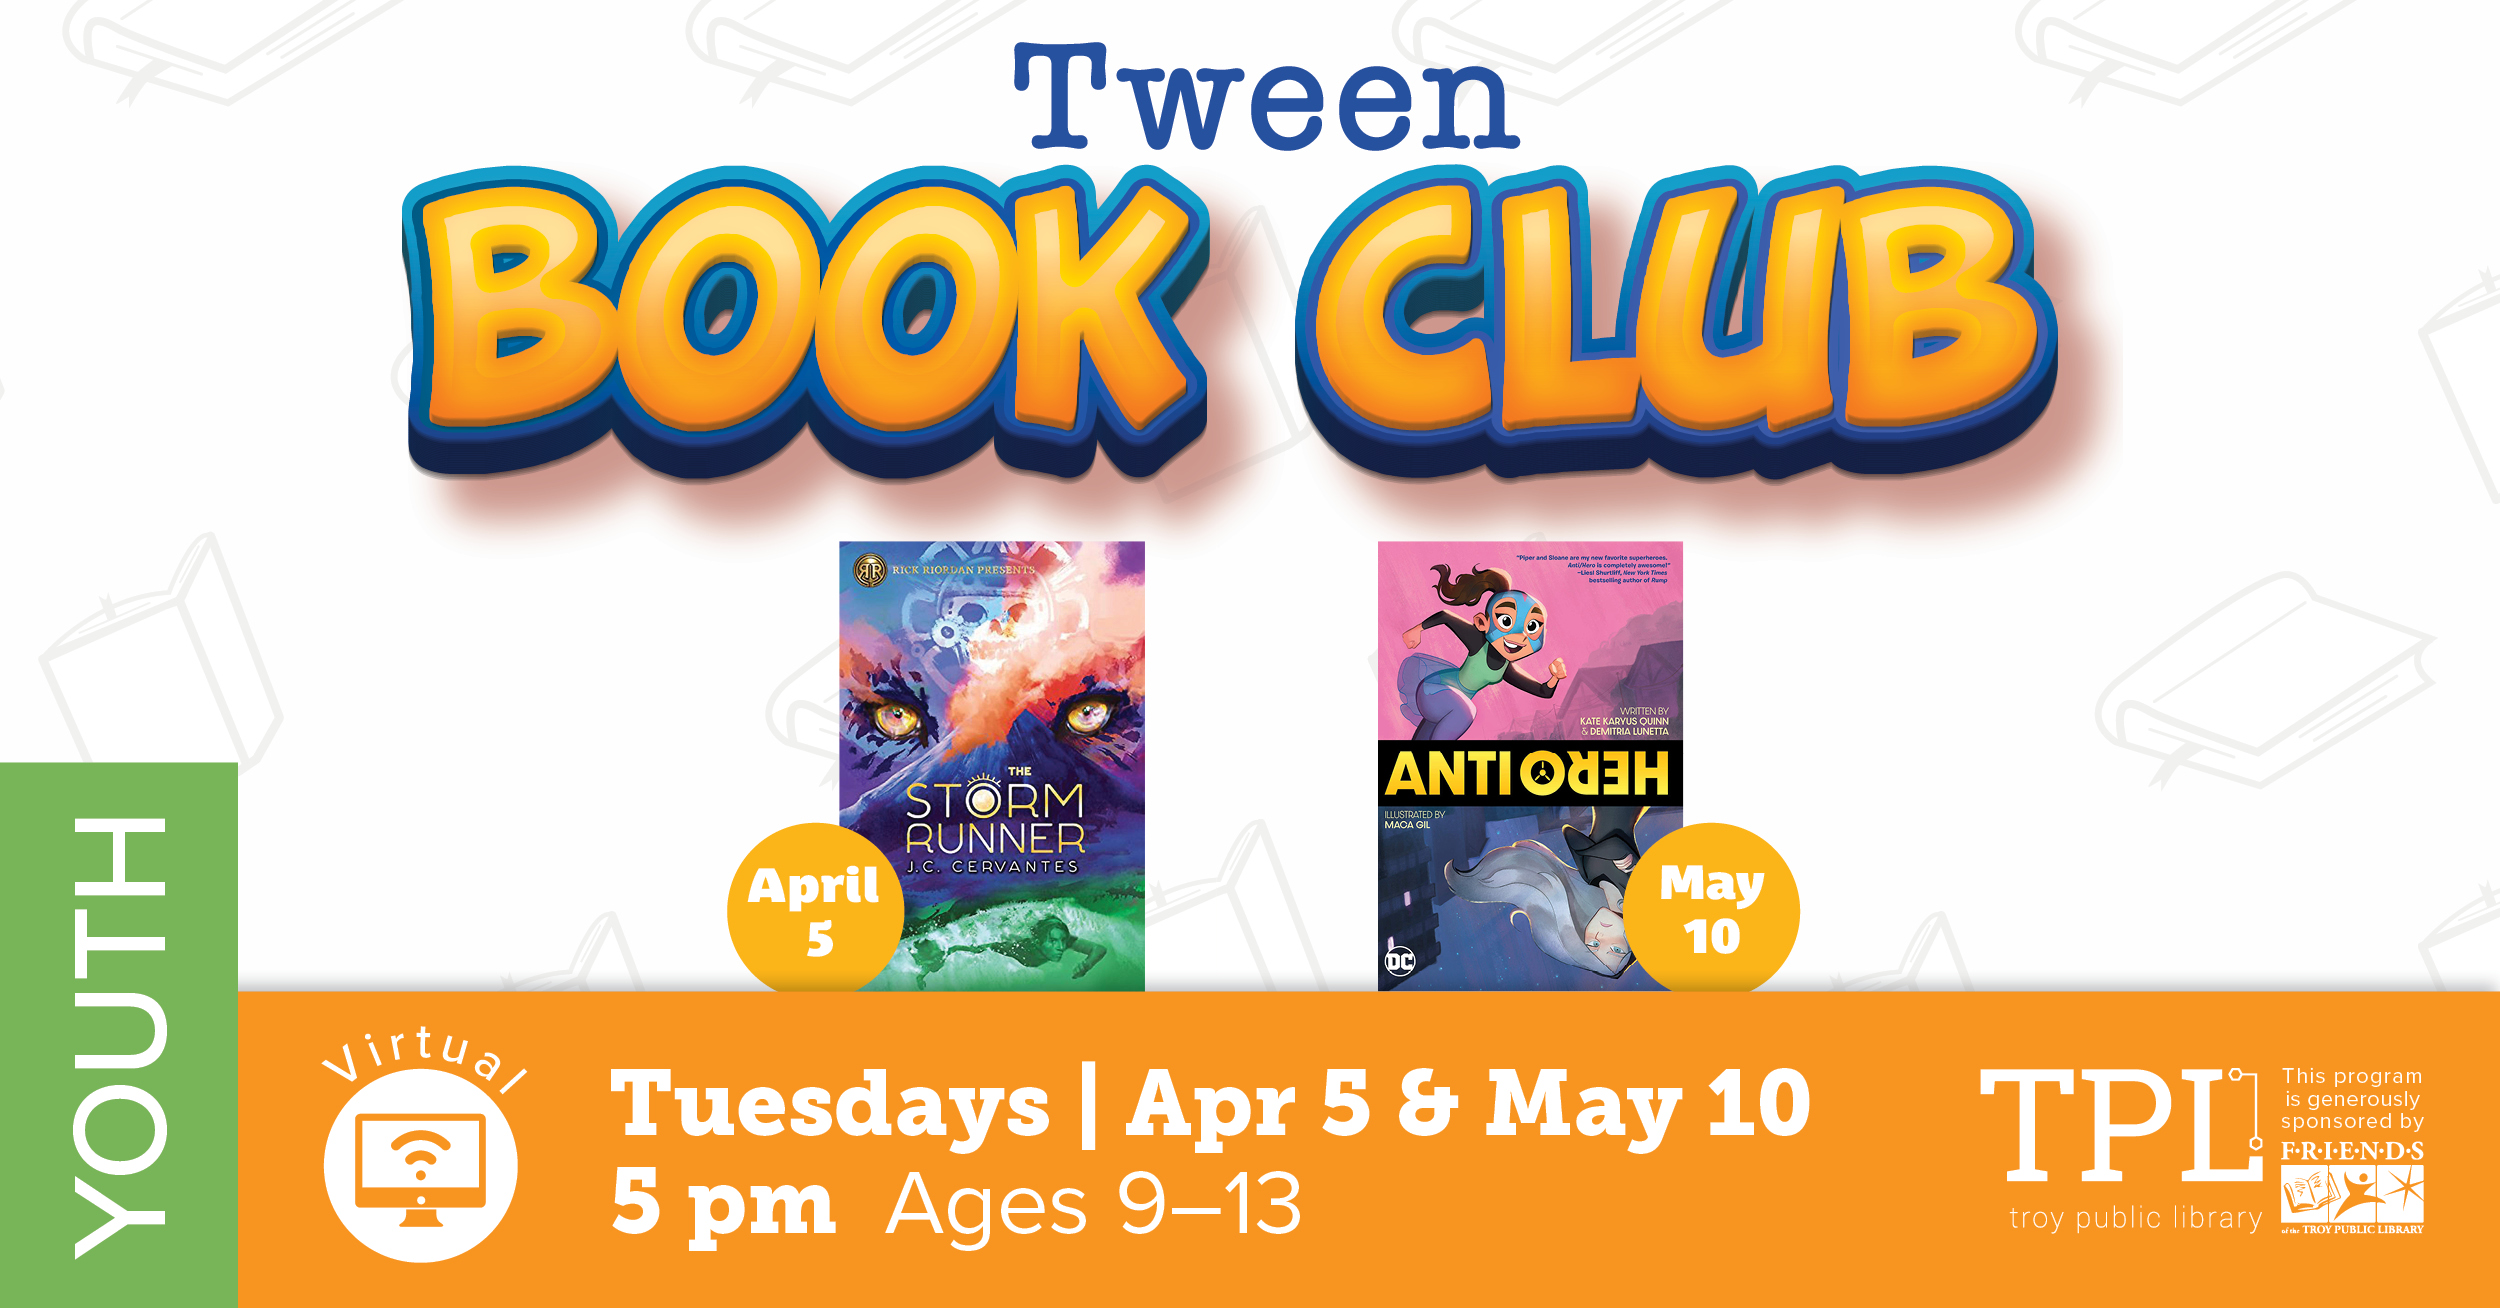 Tween Book Club. Virtual Program on Tuesday, May 10th at 5 pm for ages 9 to 13. Sponsored by the Friends of the Troy Public Library.